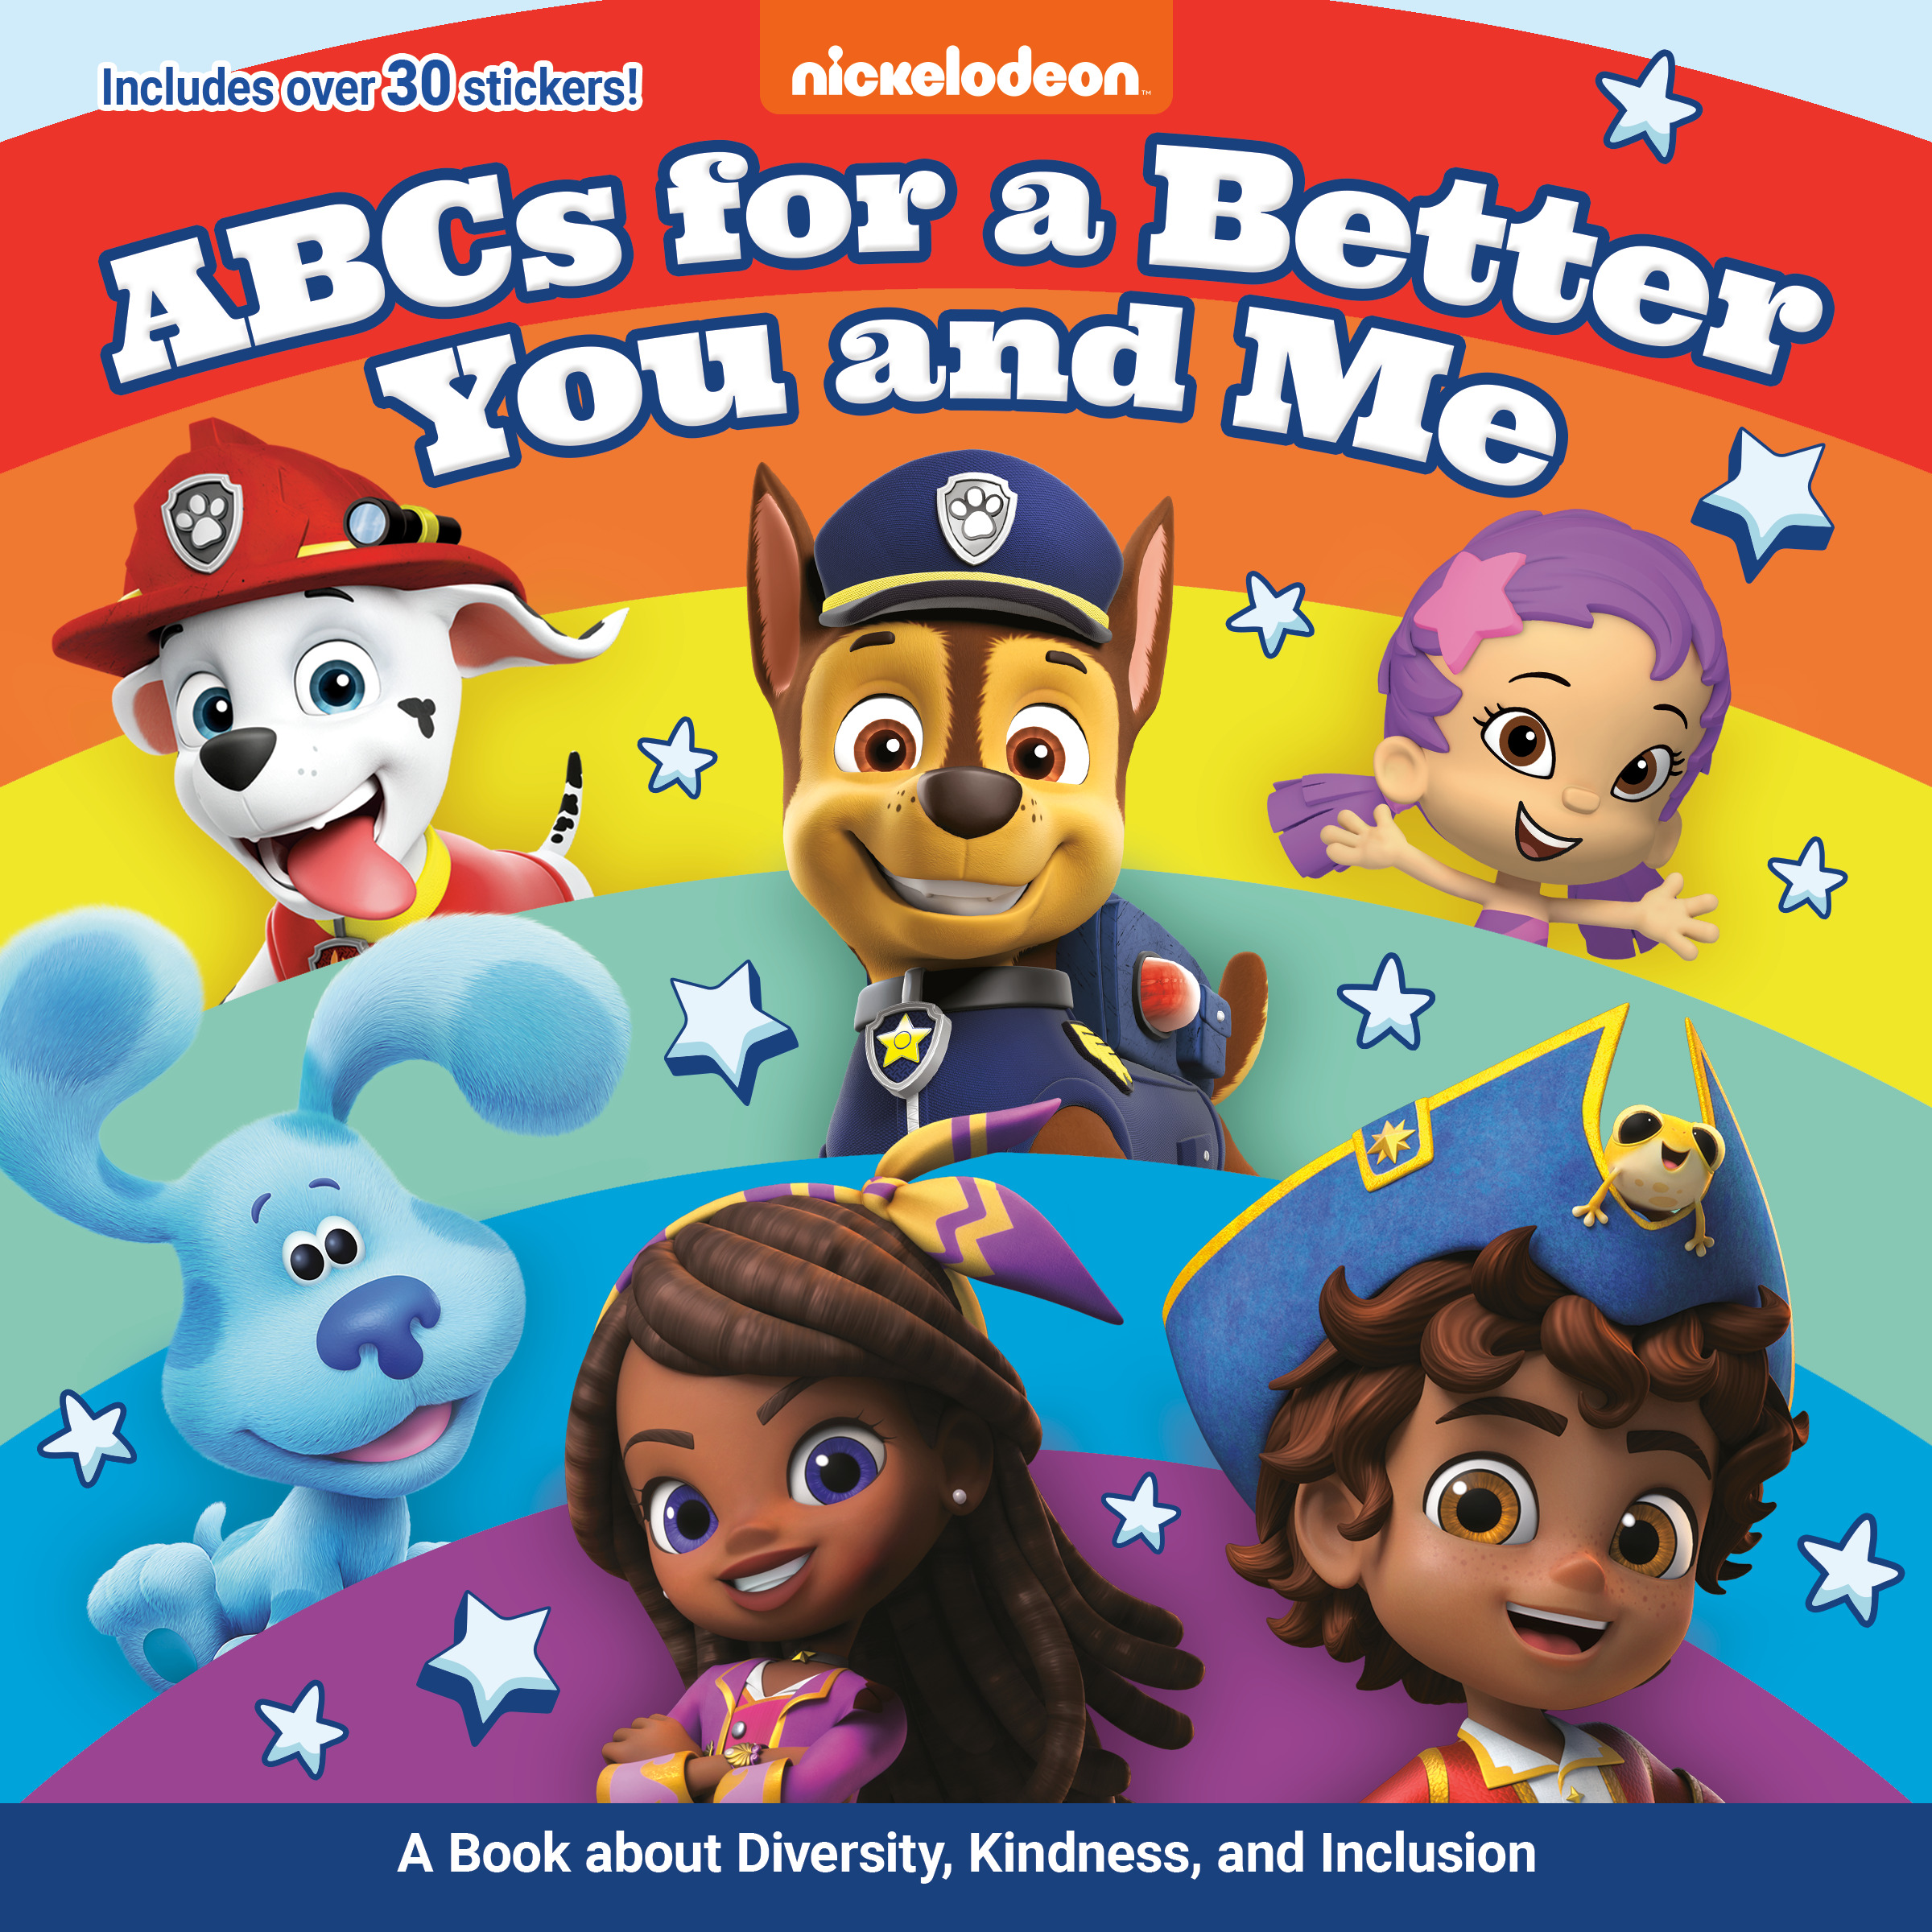 ABCs for a Better You and Me: A Book About Diversity, Kindness, and Inclusion  (Nickelodeon) | First reader